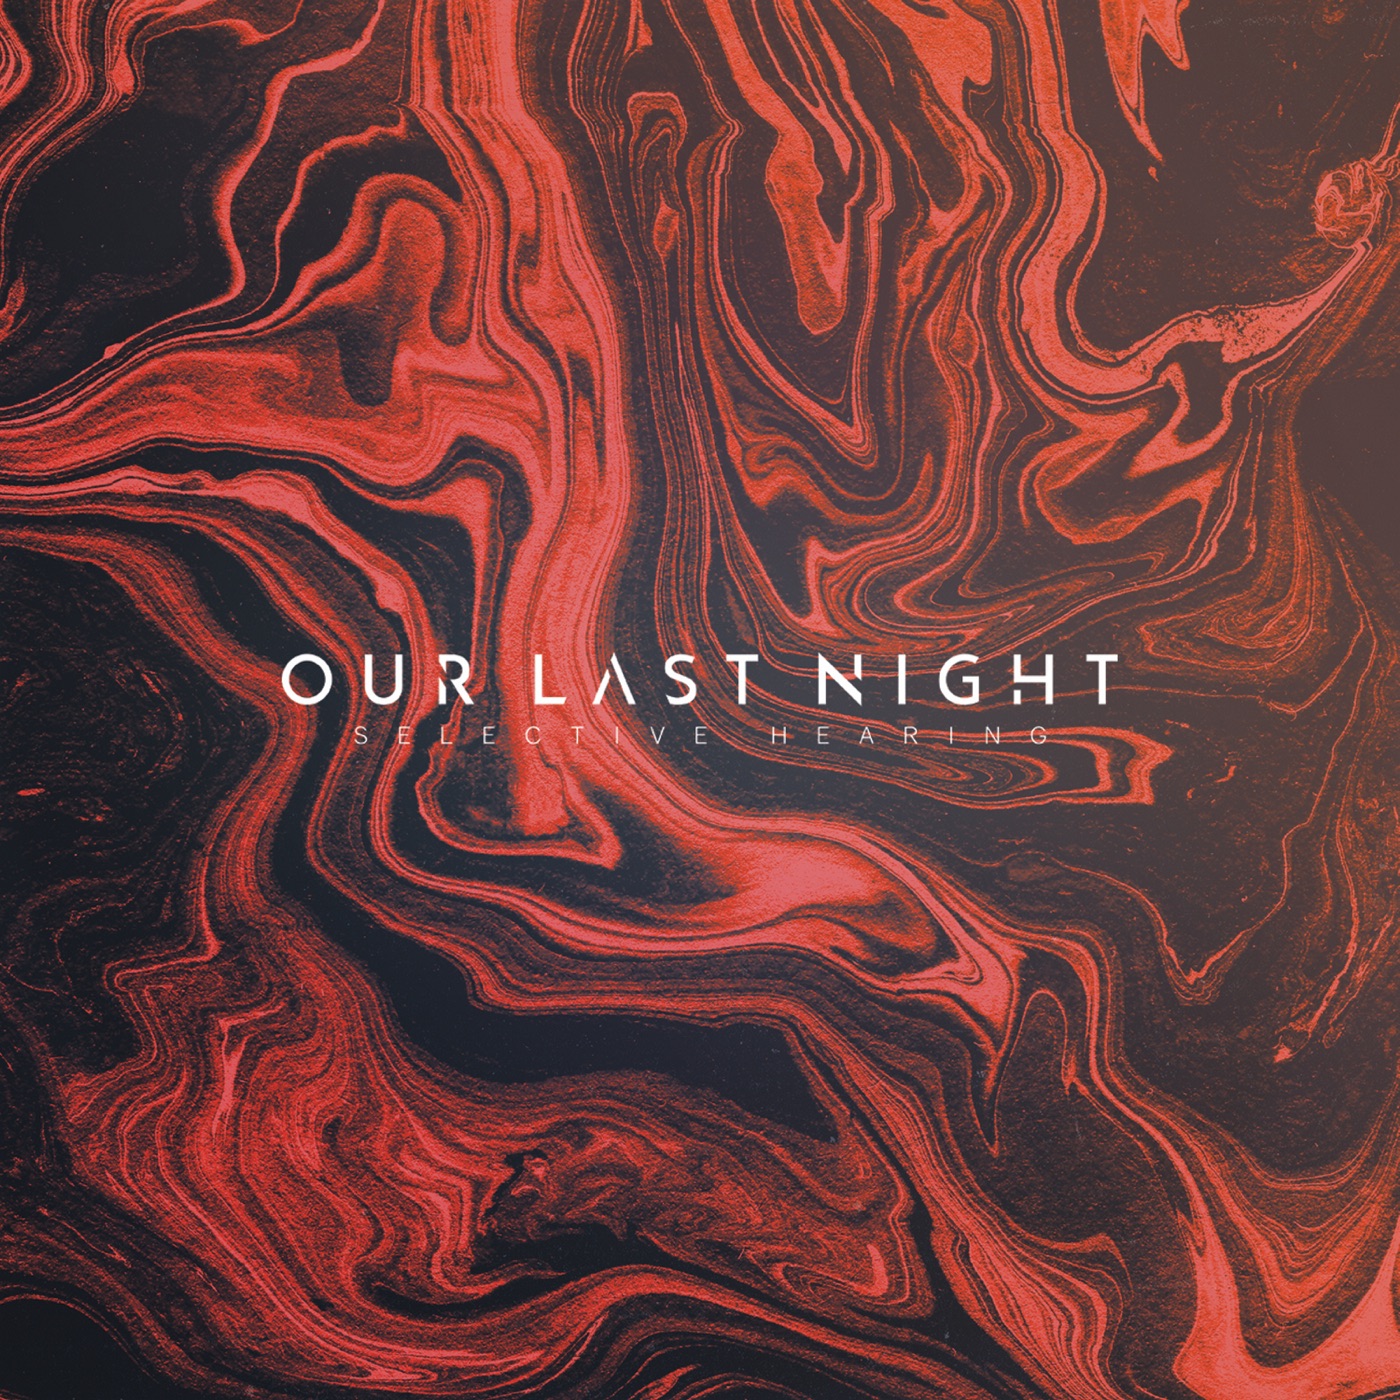 Our Last Night - Tongue Tied [single] (2017)